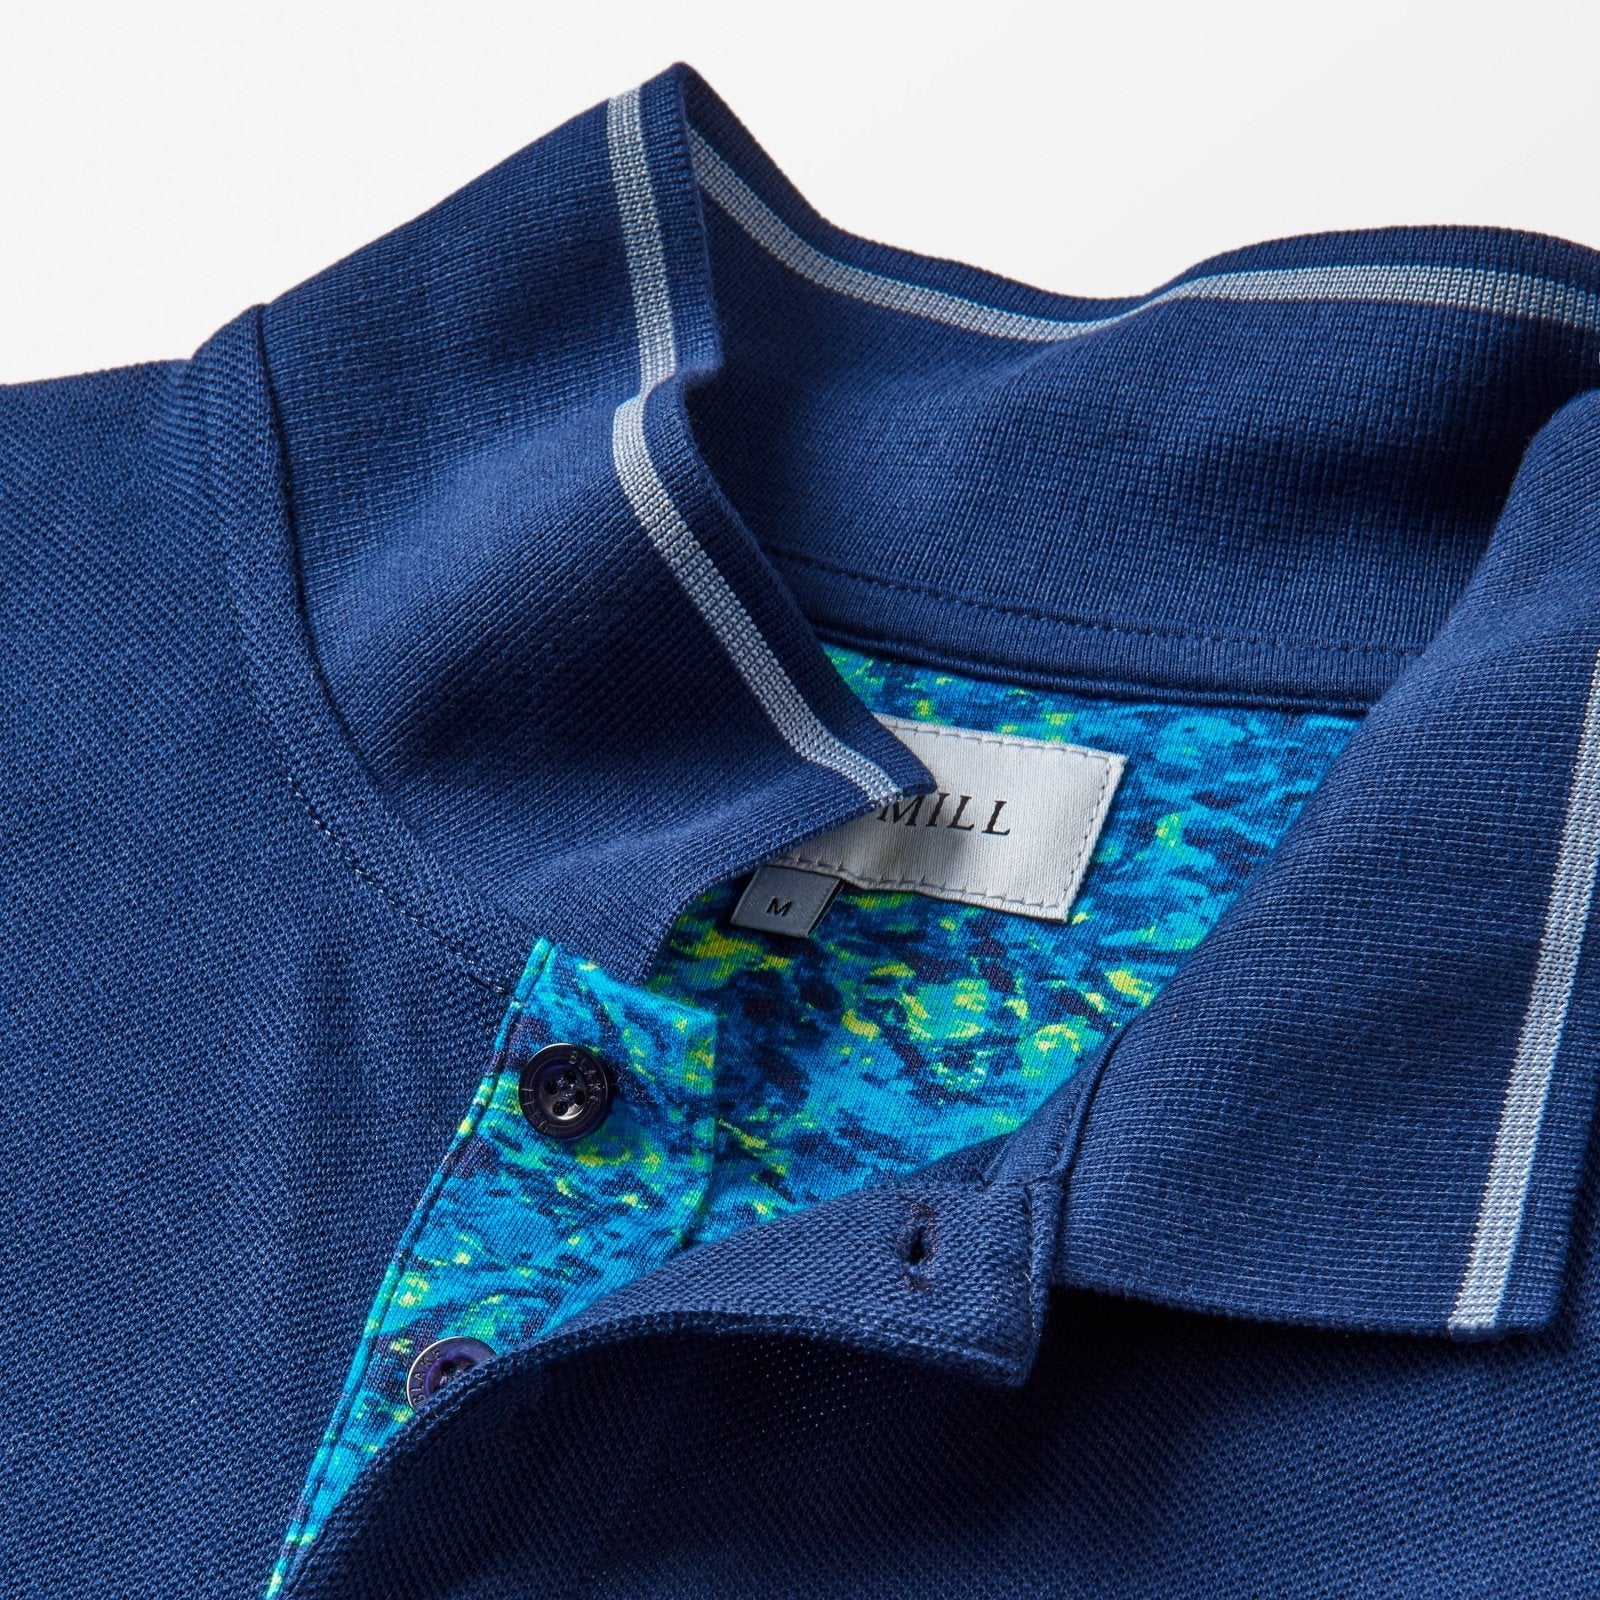 Navy Pique Polo with Ocean Accents - Blake Mill